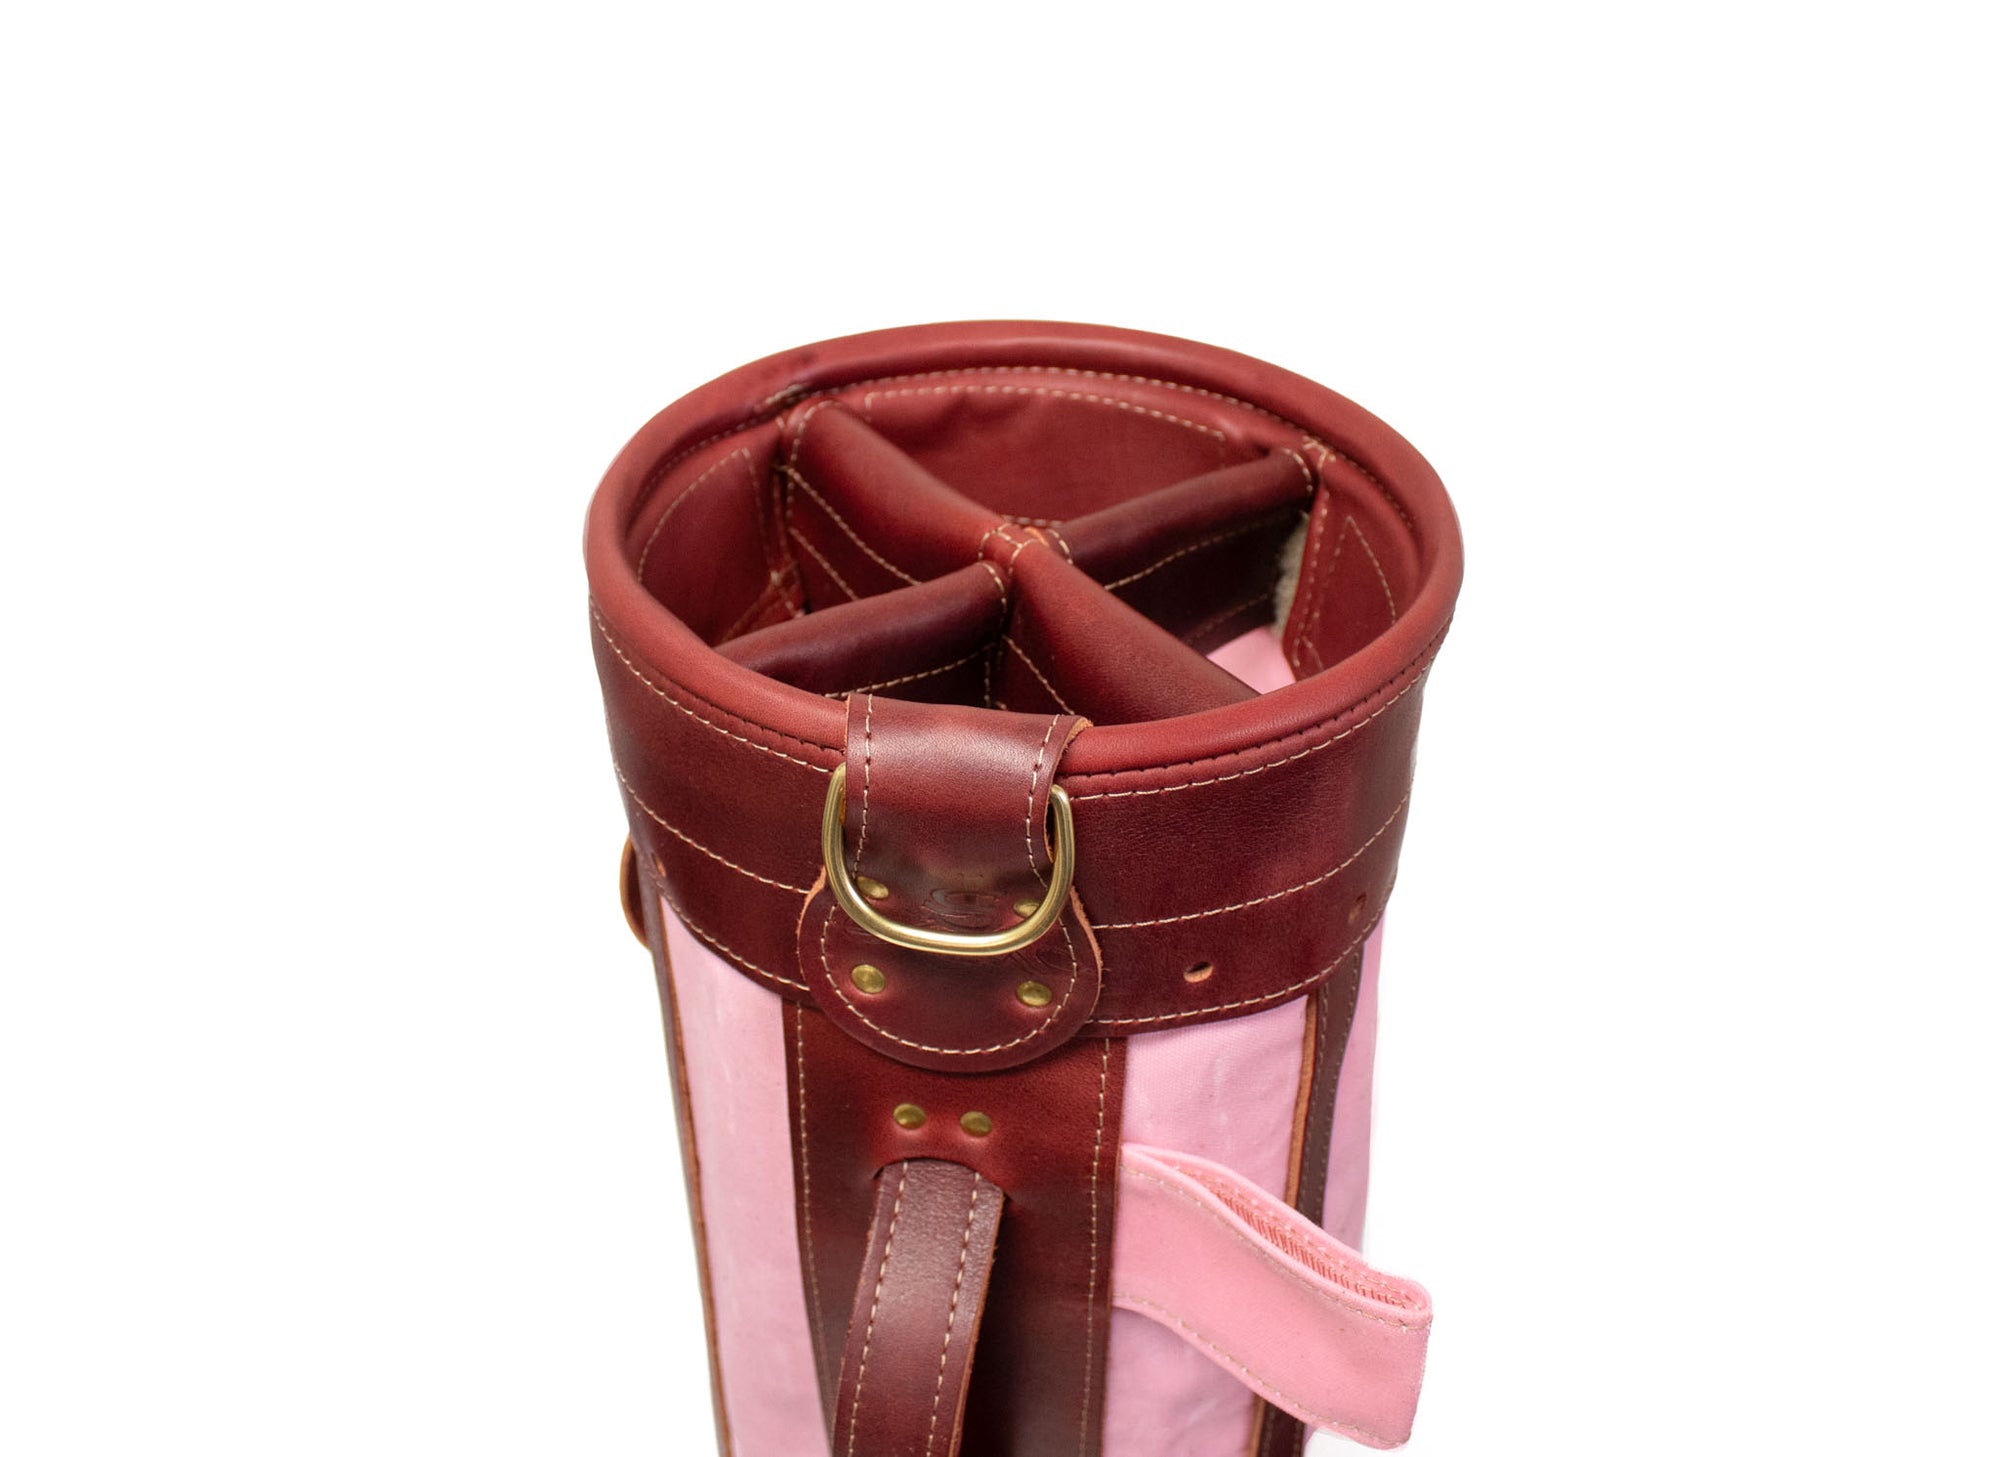 Light Pink and Burgundy Leather Sunday Style Golf Bag 4- Way Divider- Steurer & Jacoby